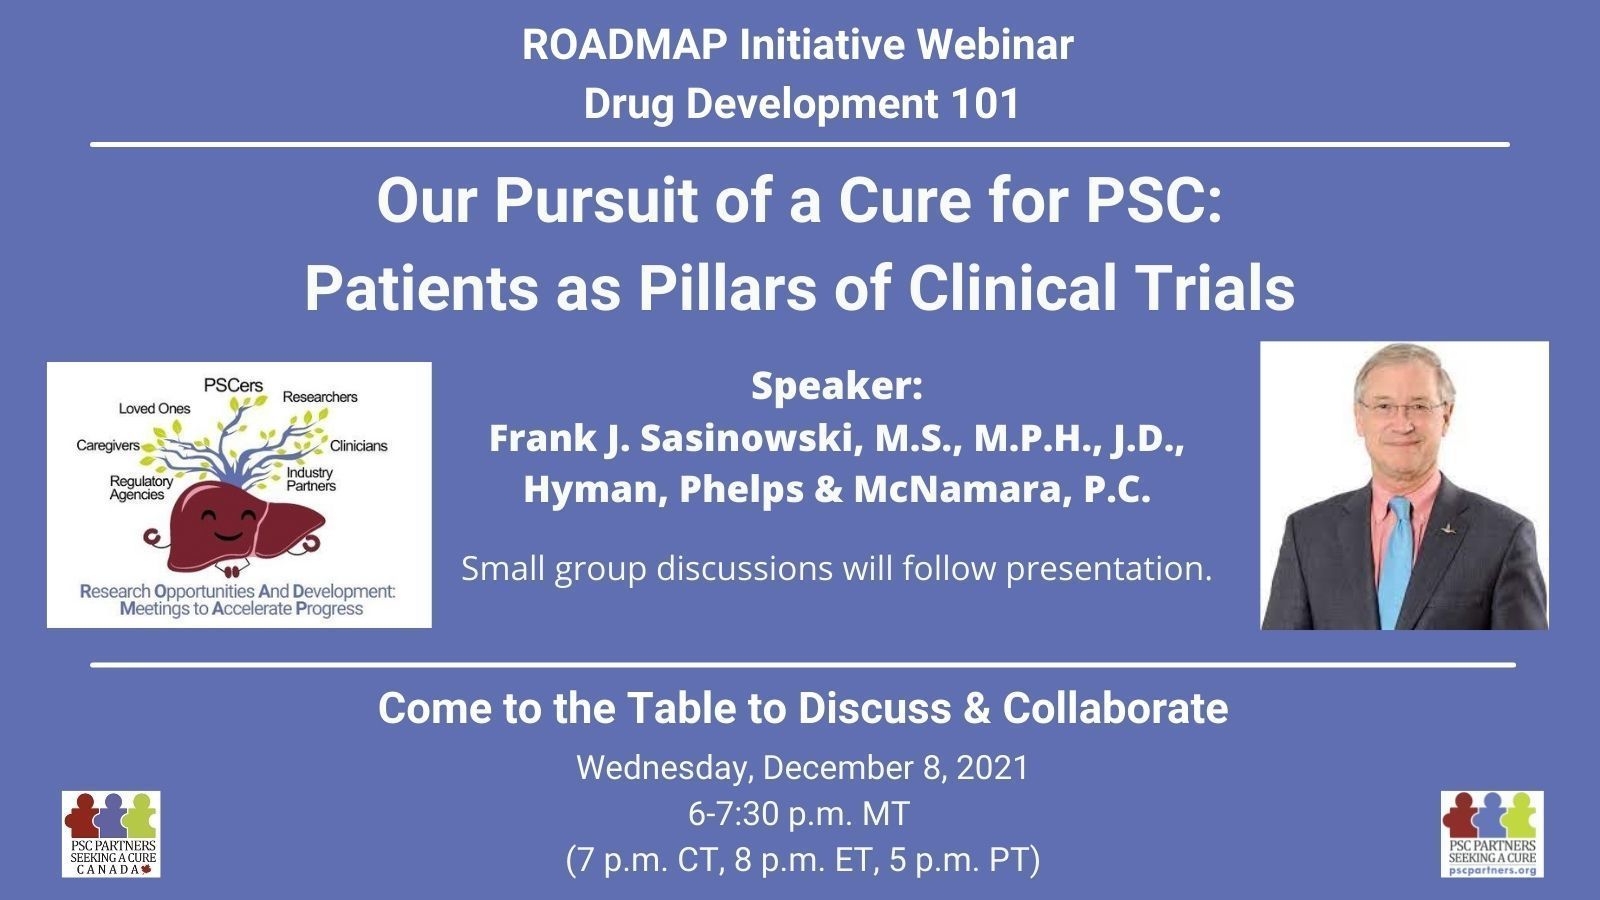 ROADMAP Drug Development 101 - Our Pursuit of a Cure for PSC: Patients as Pillars of Clinical Trials